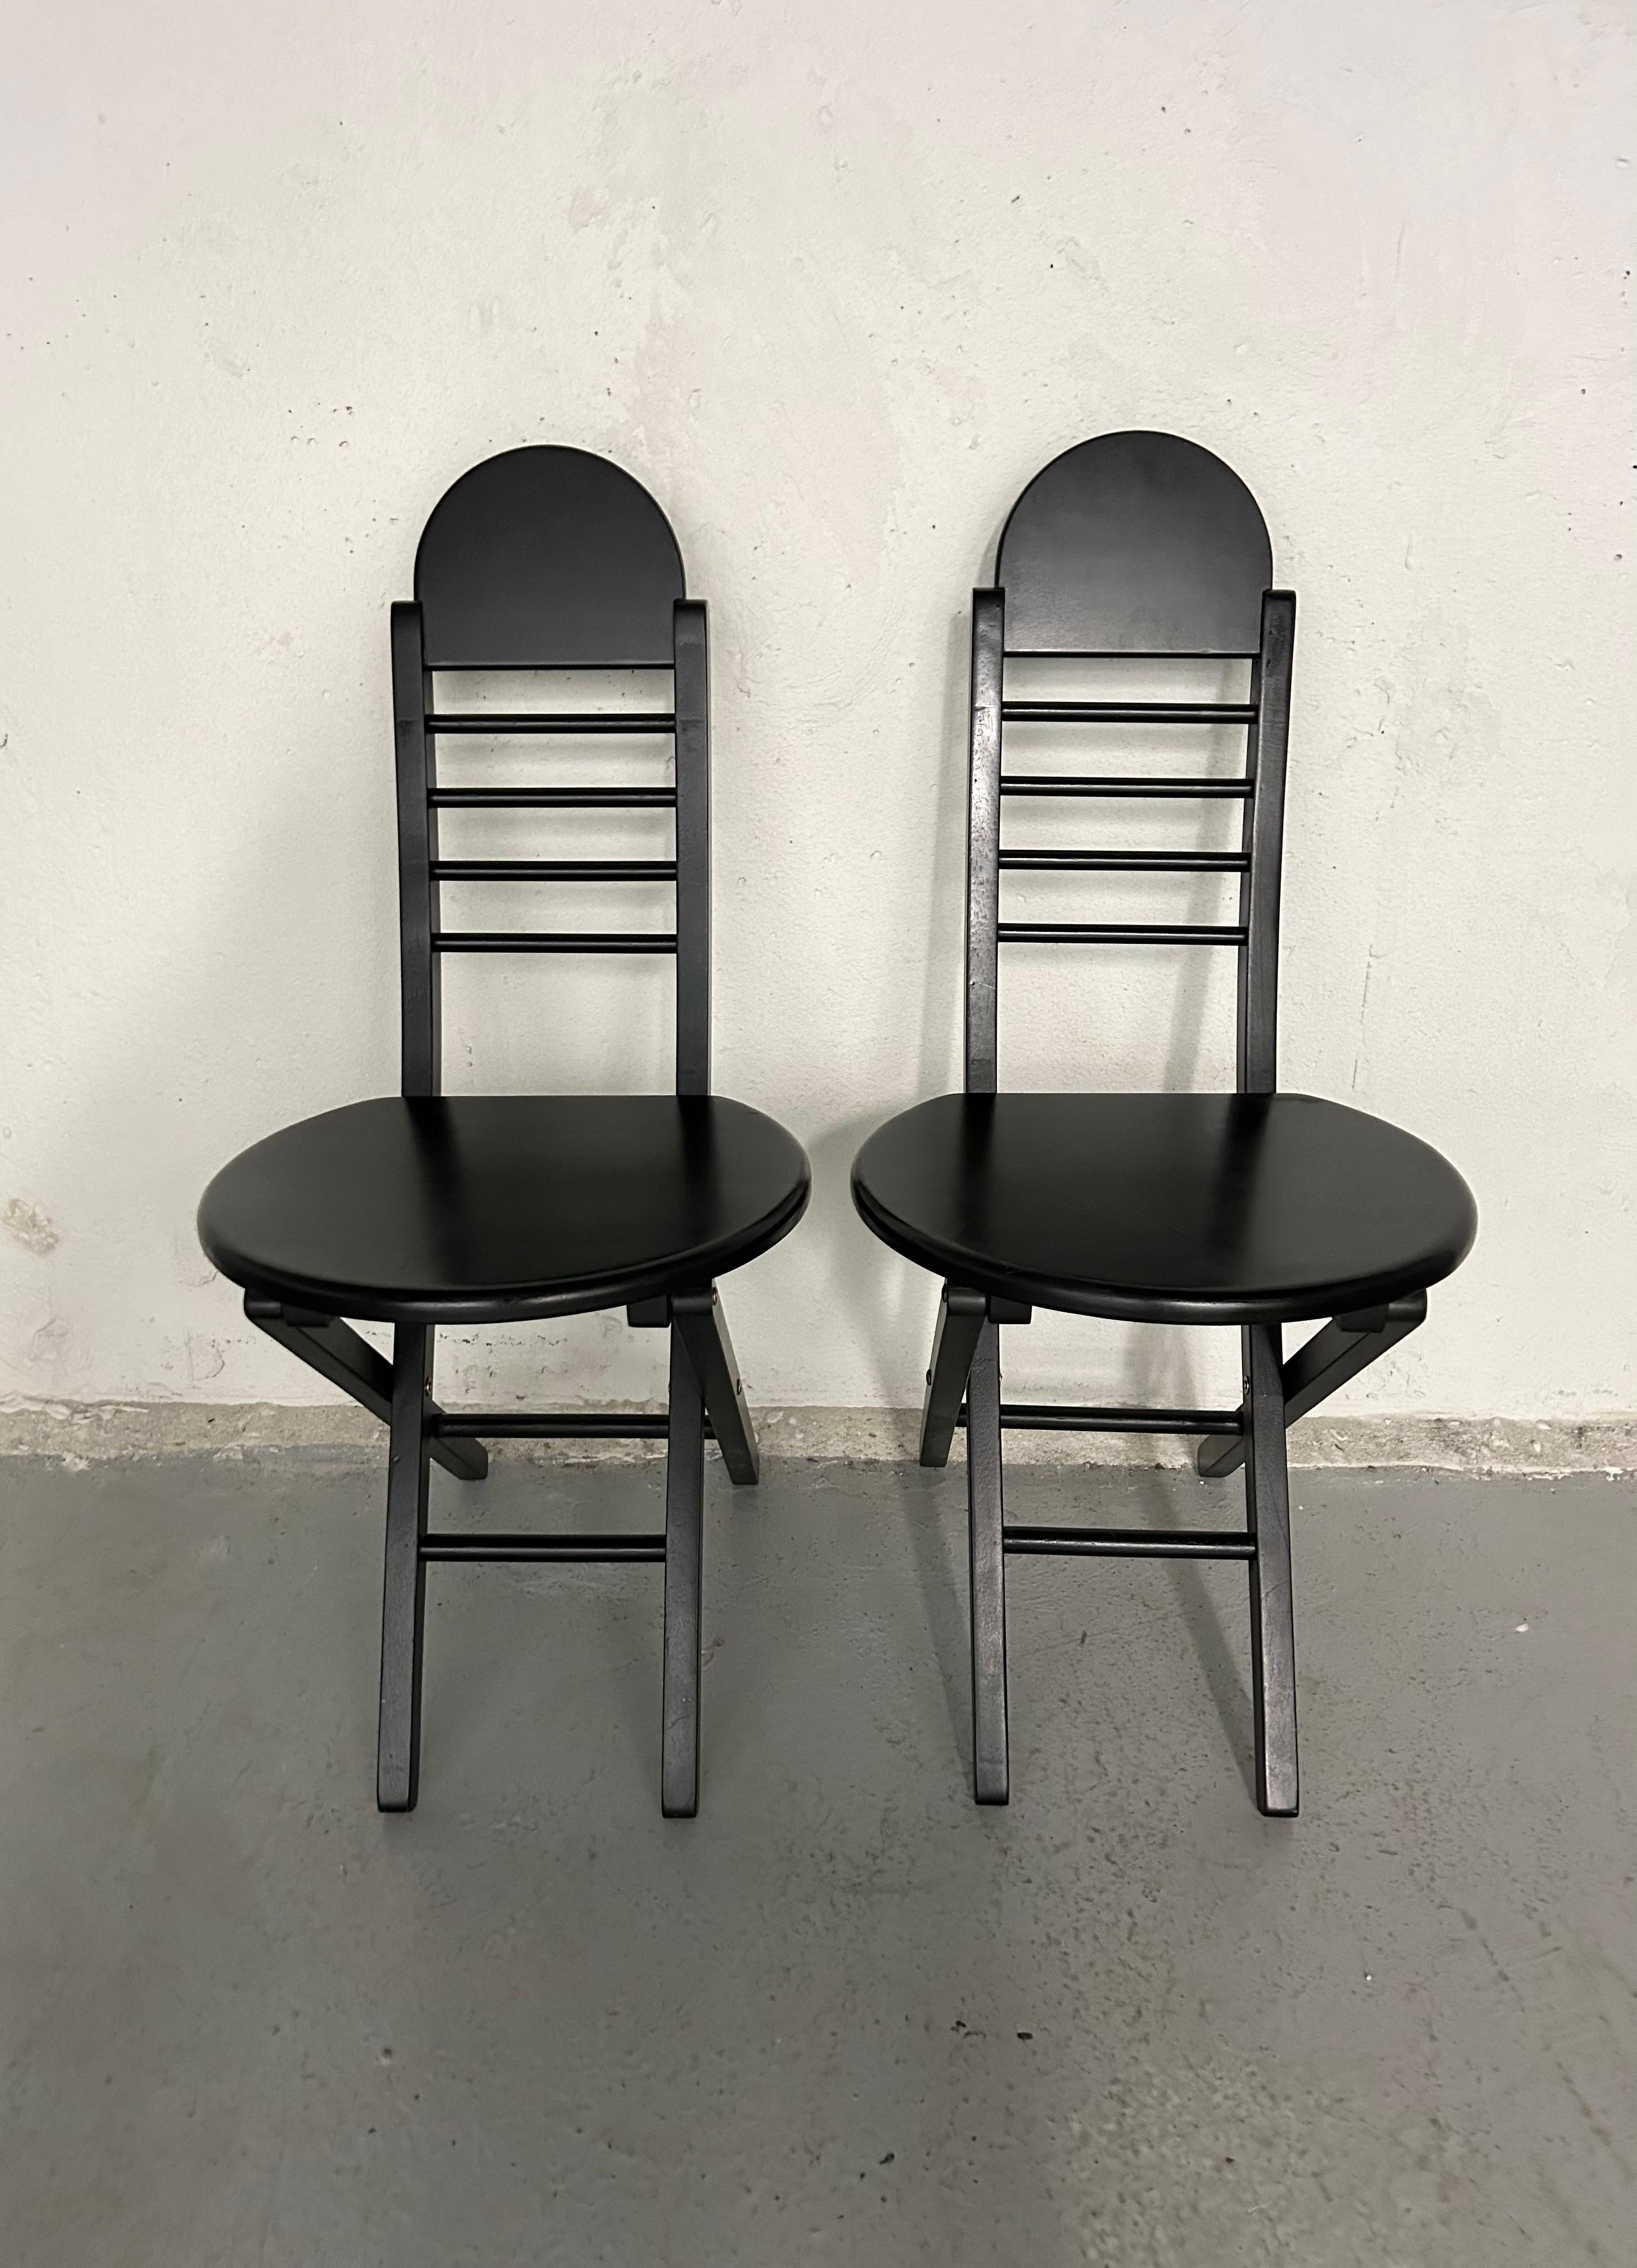 Set of 2 - Vintage 90s black painted wood folding chairs. Made in Thailand.
Normal vintage wear. 

35.5” chair height
19” seat height
16” width
19” depth